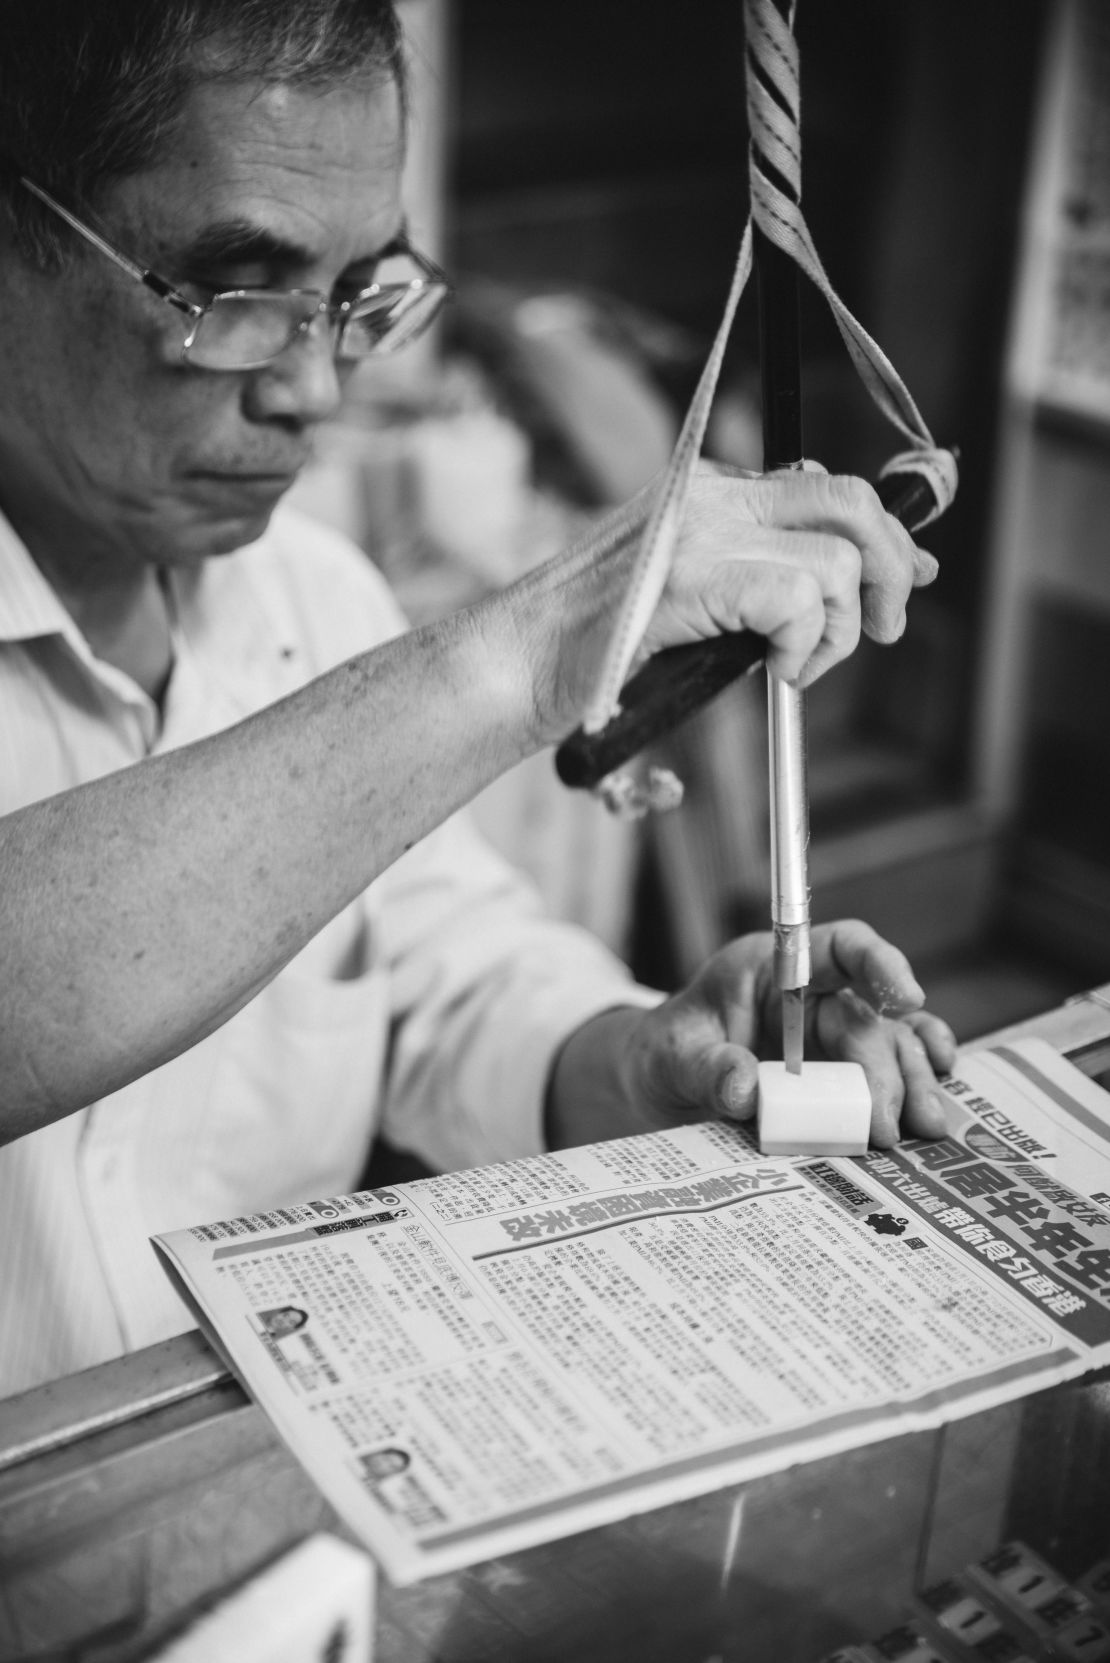 Cheung Shun King learned his trade from his father and grandfather in the family shop, where his first job was painting the tiles. 